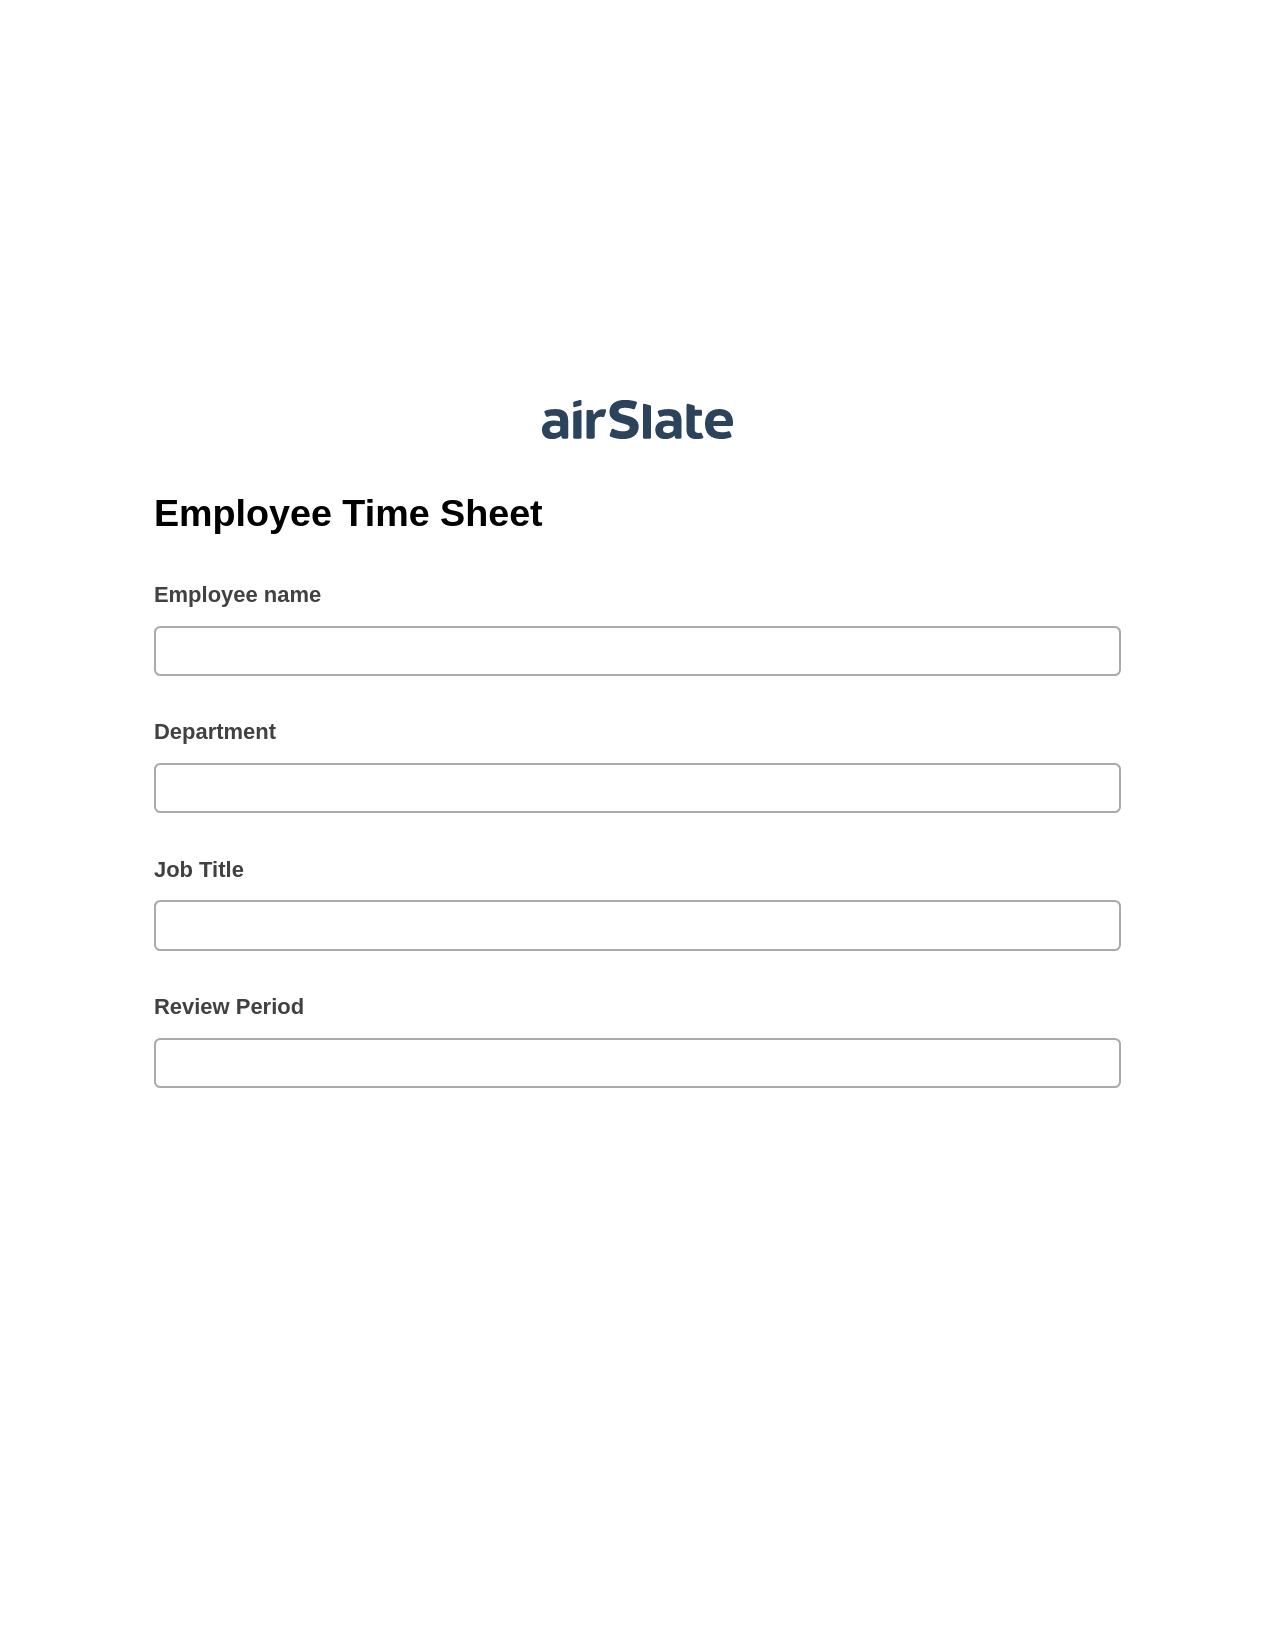 Employee Time Sheet Pre-fill from Google Sheets Bot, Update MS Dynamics 365 Record Bot, Export to Excel 365 Bot